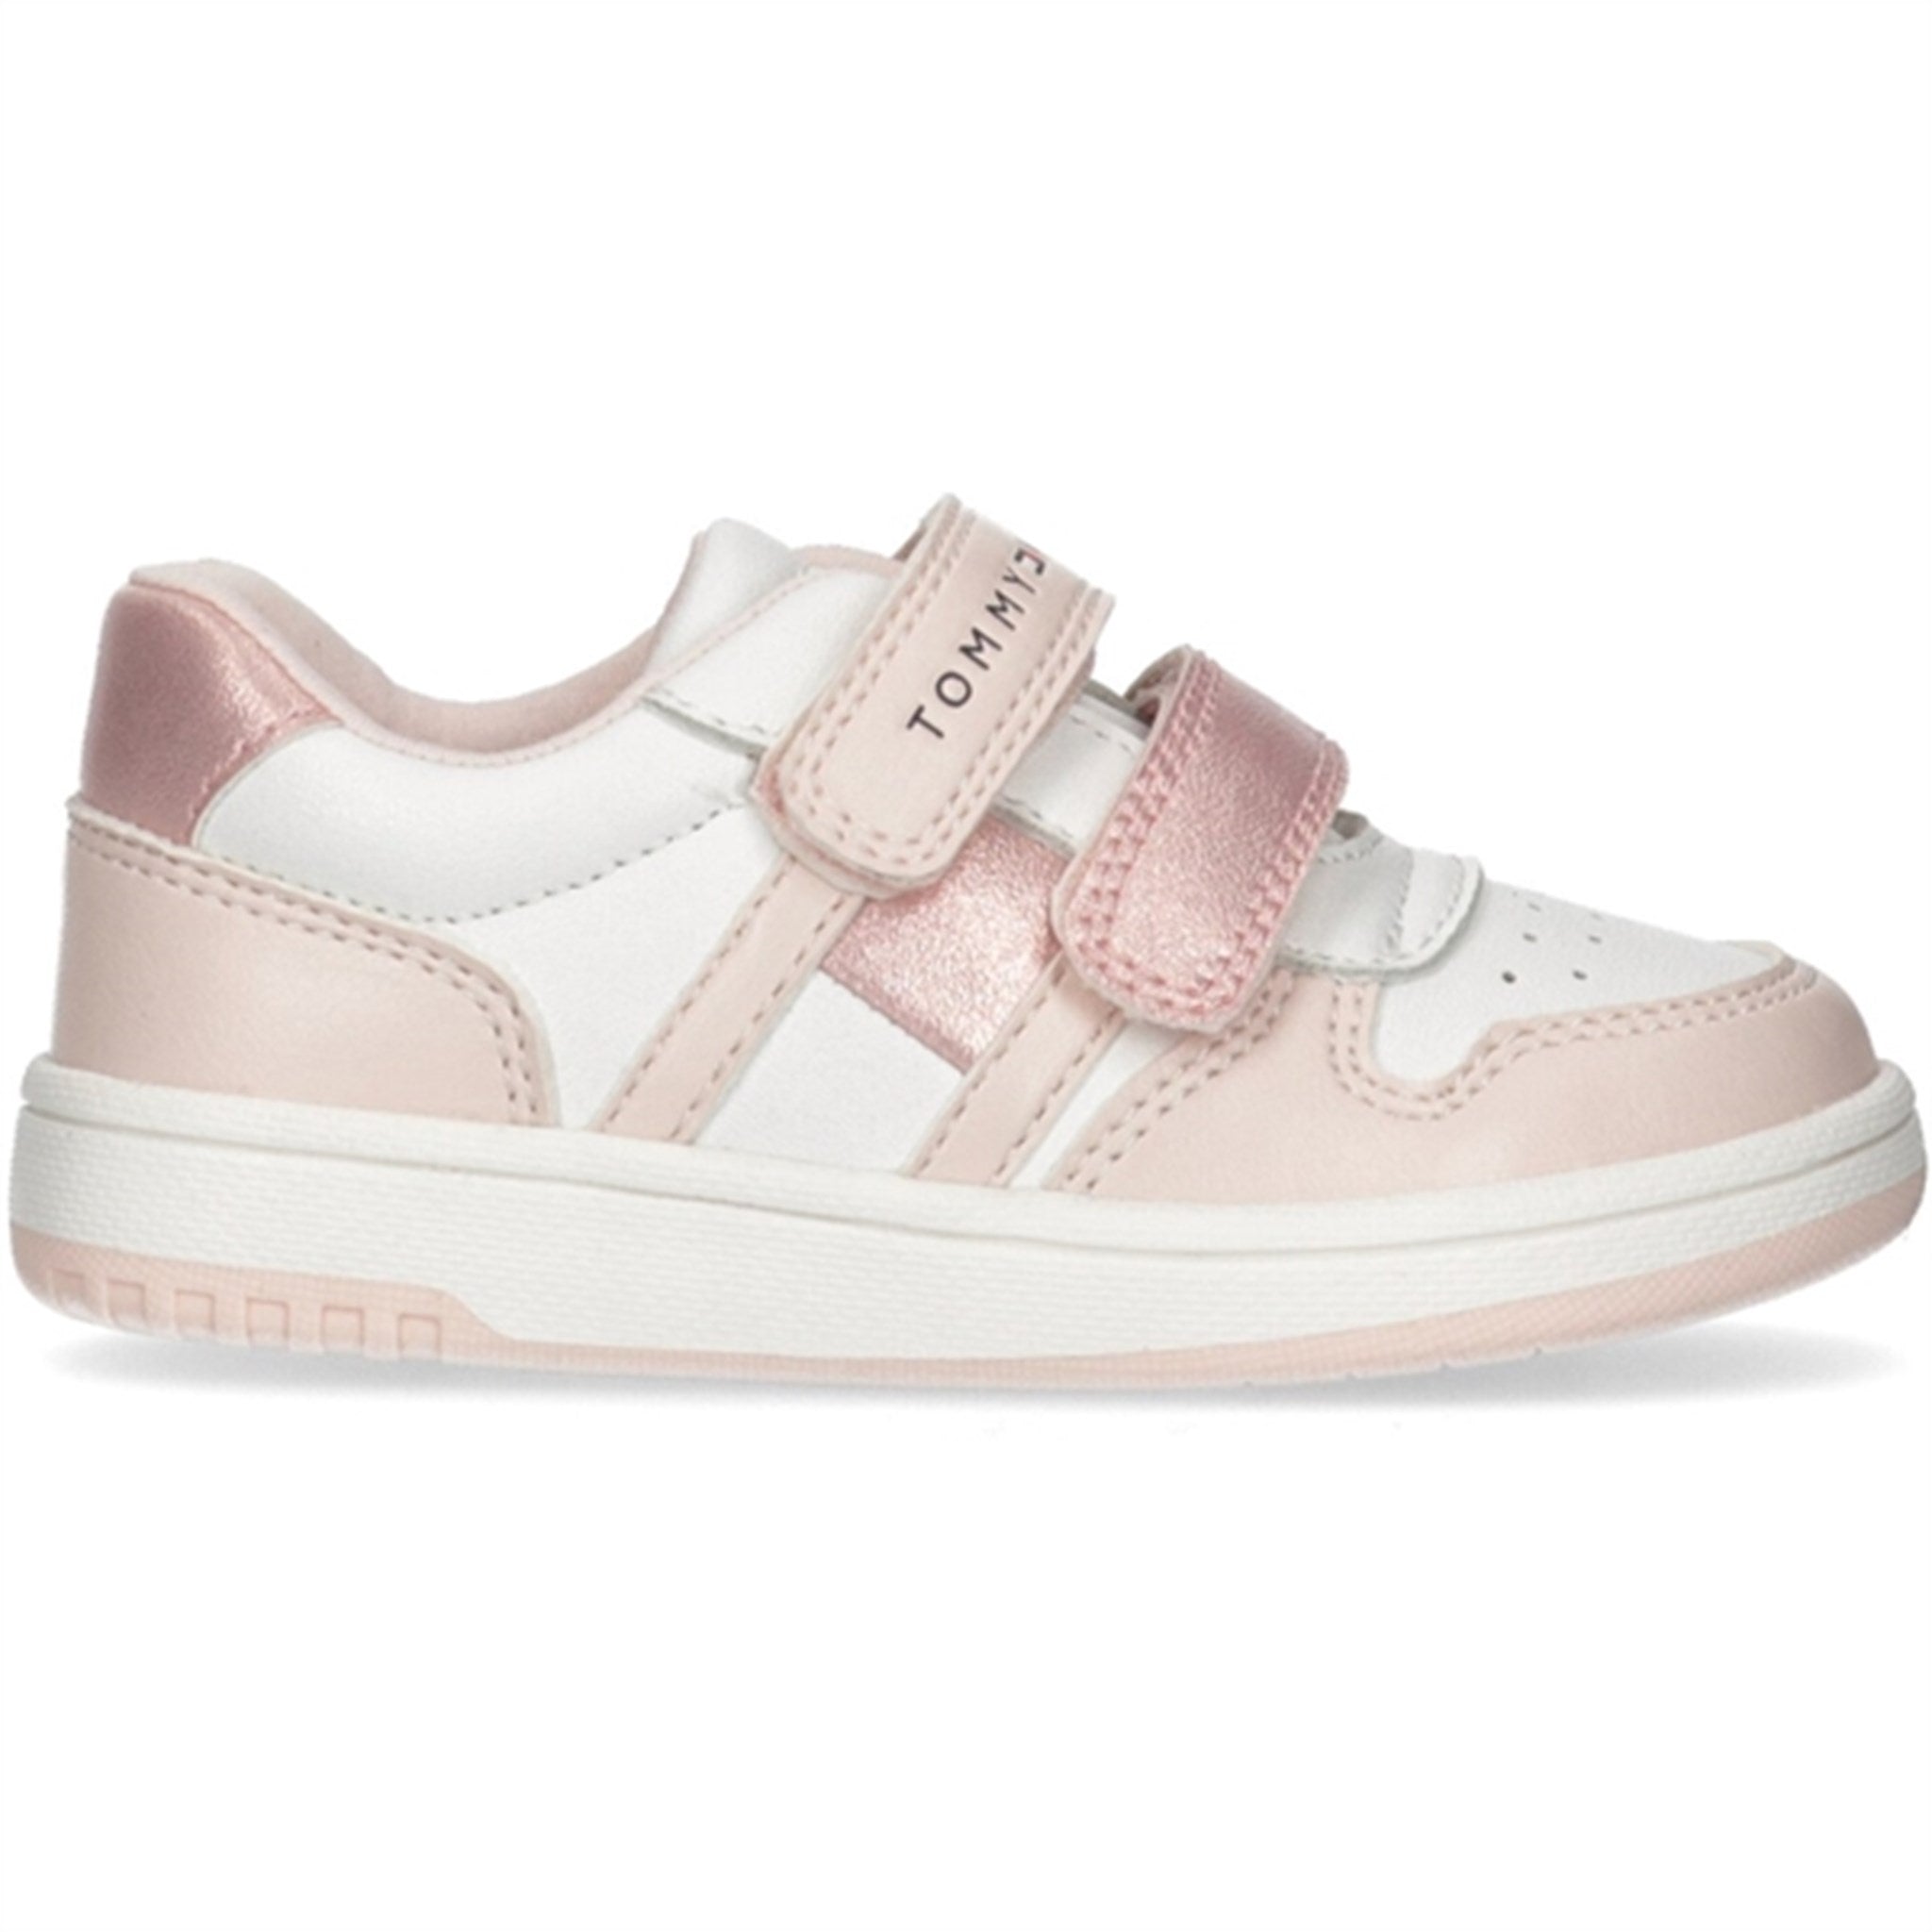 Tommy Hilfiger Low Cut Velcro Sneakers Pink/White 4